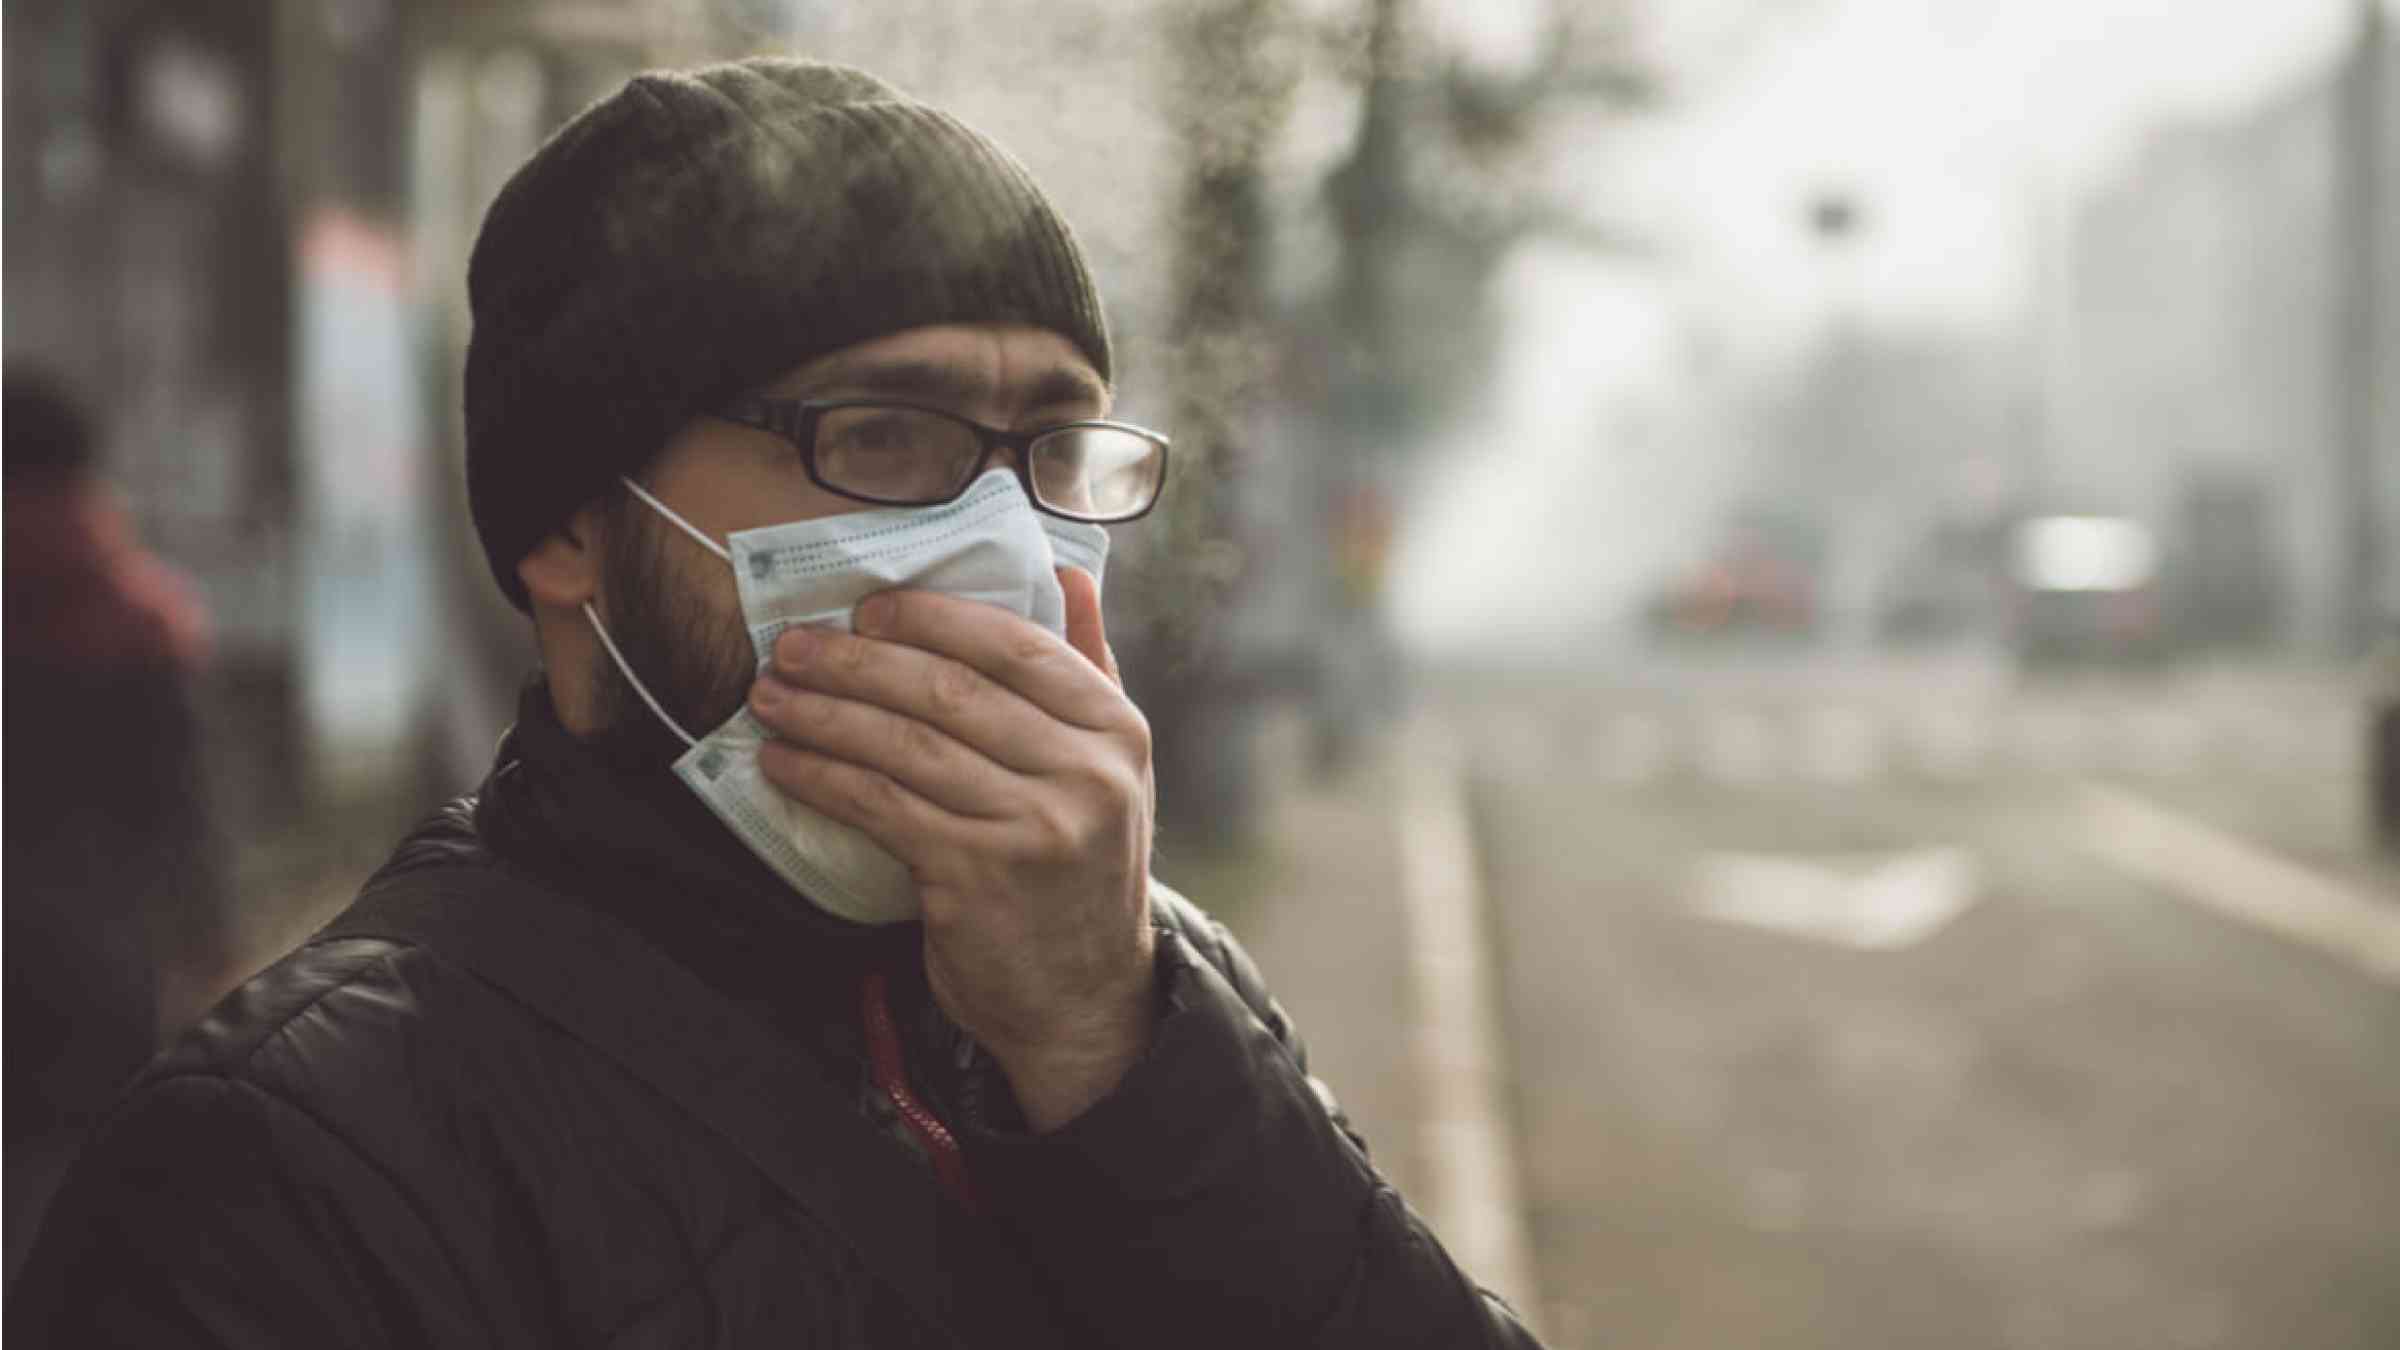 Man covering face from air pollution